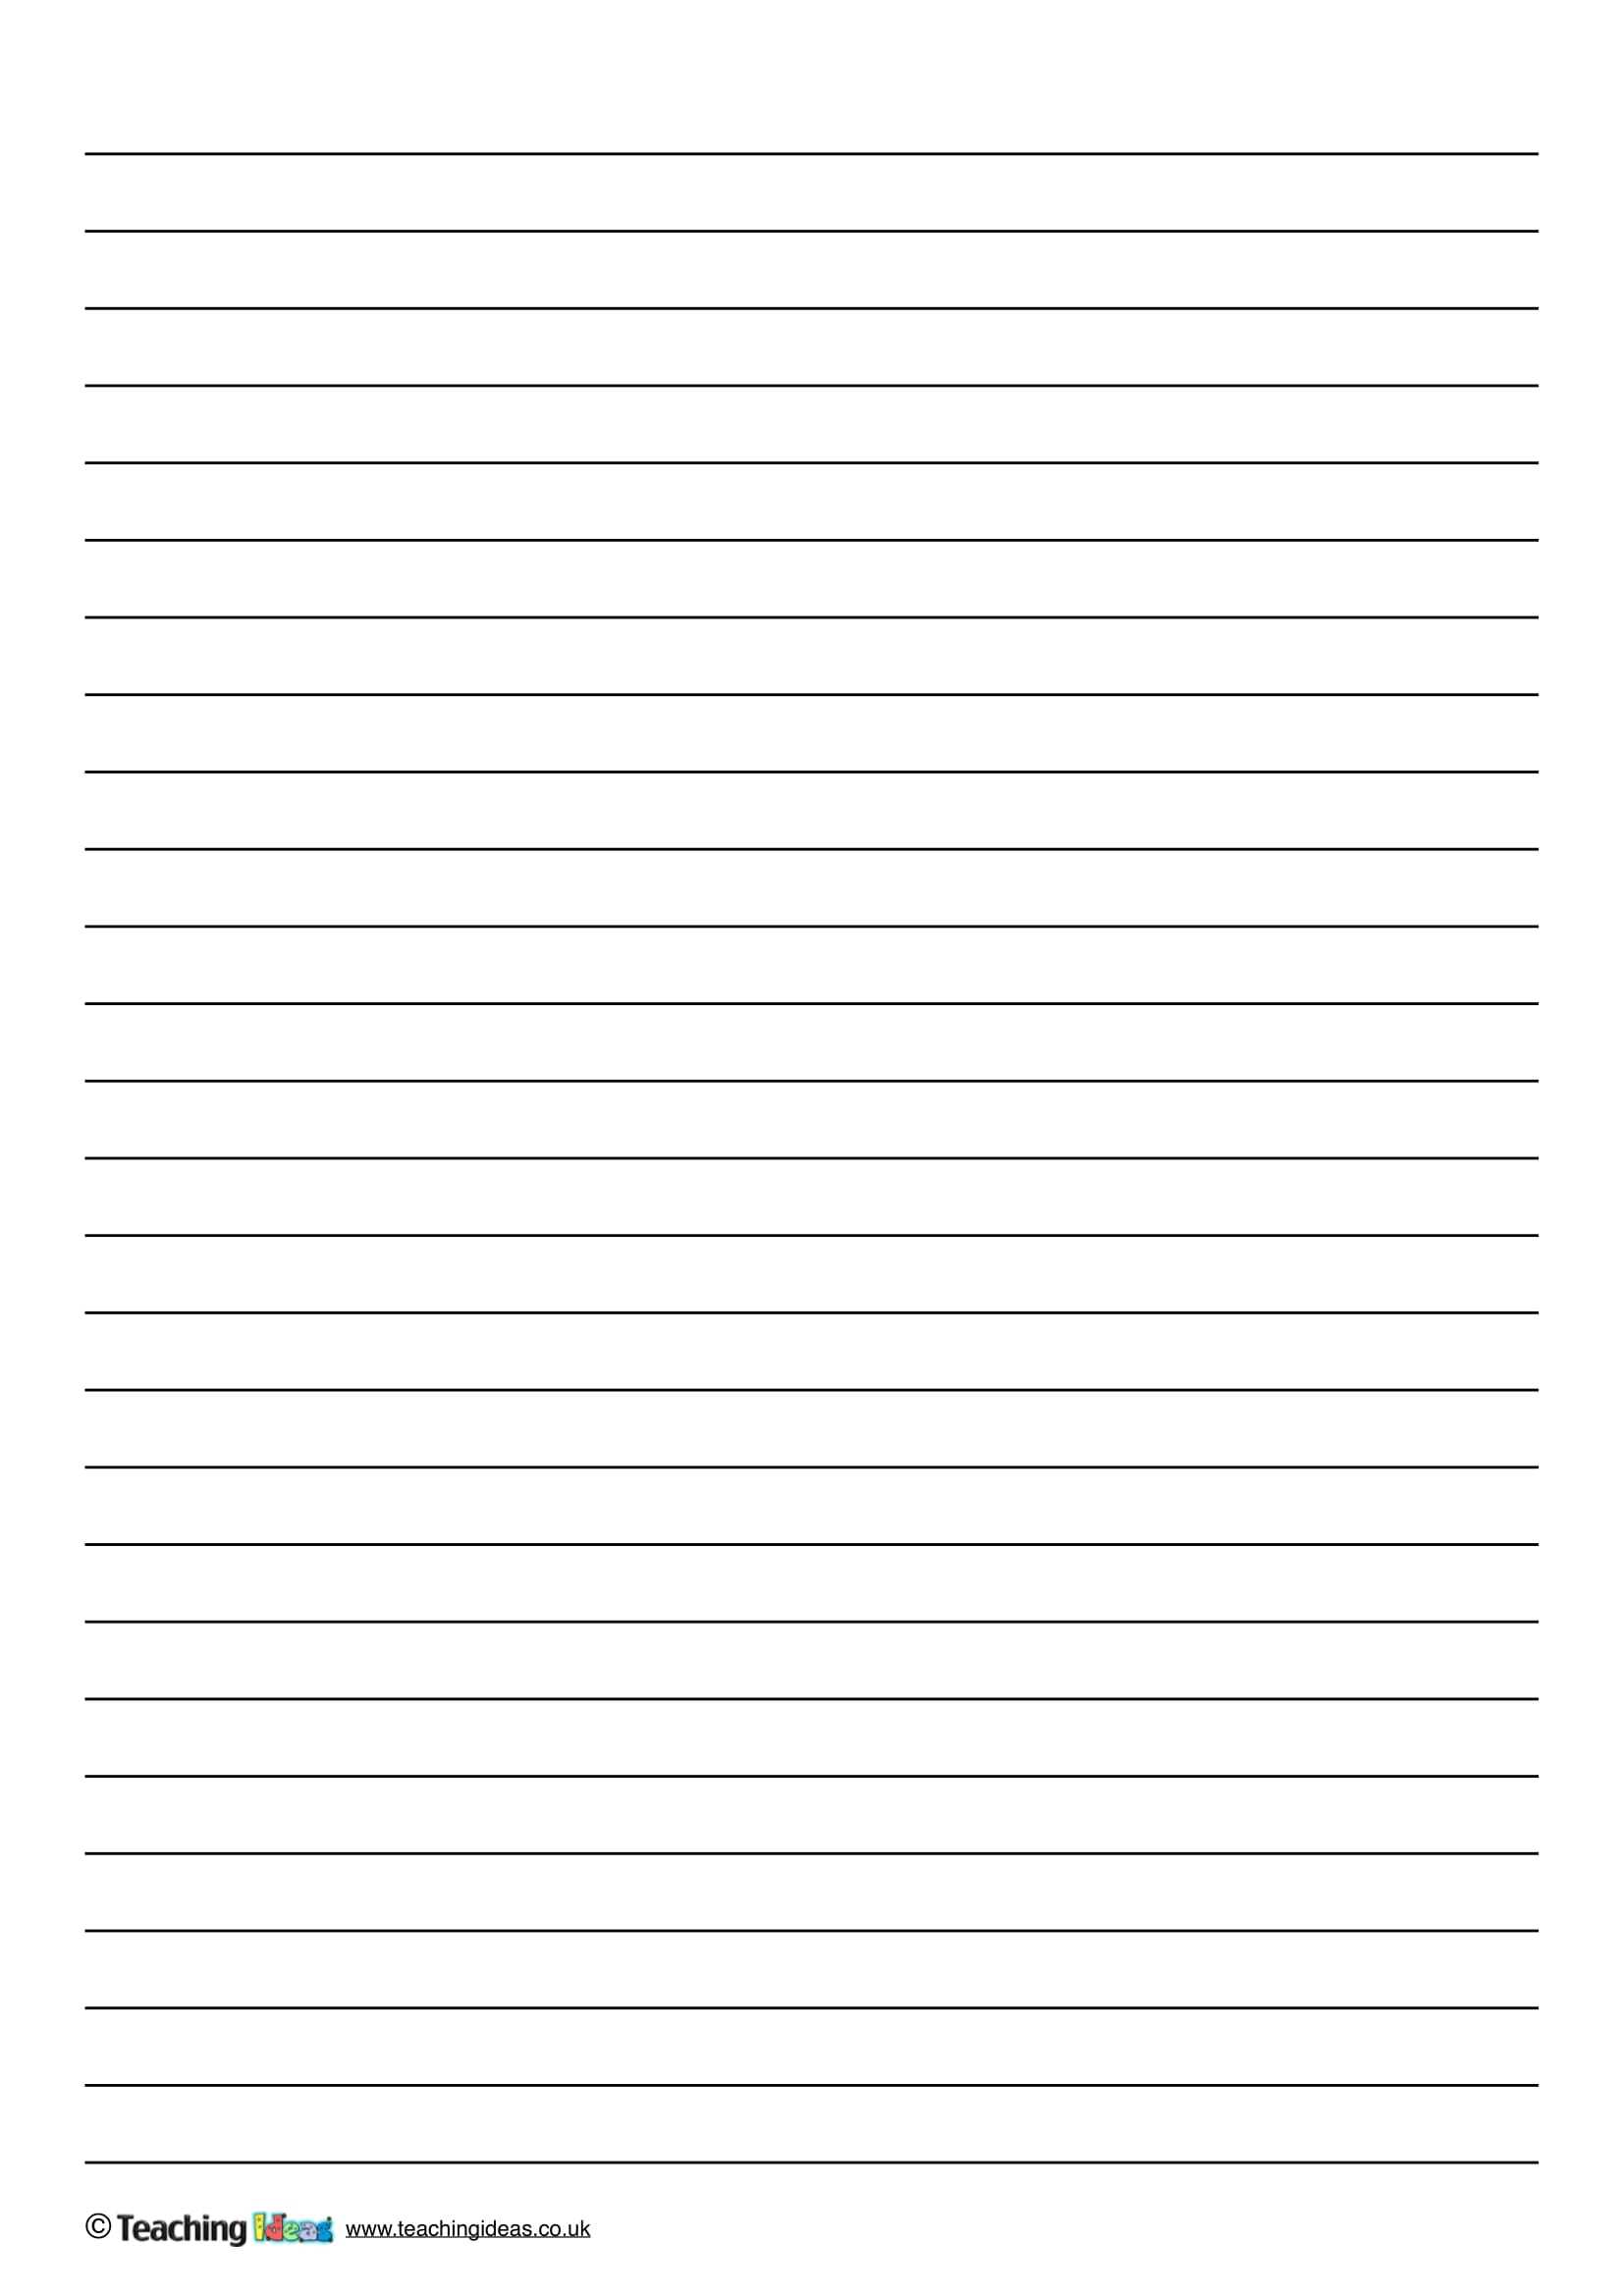 Ruled Paper Template - Calep.midnightpig.co Inside Ruled Paper Word Template